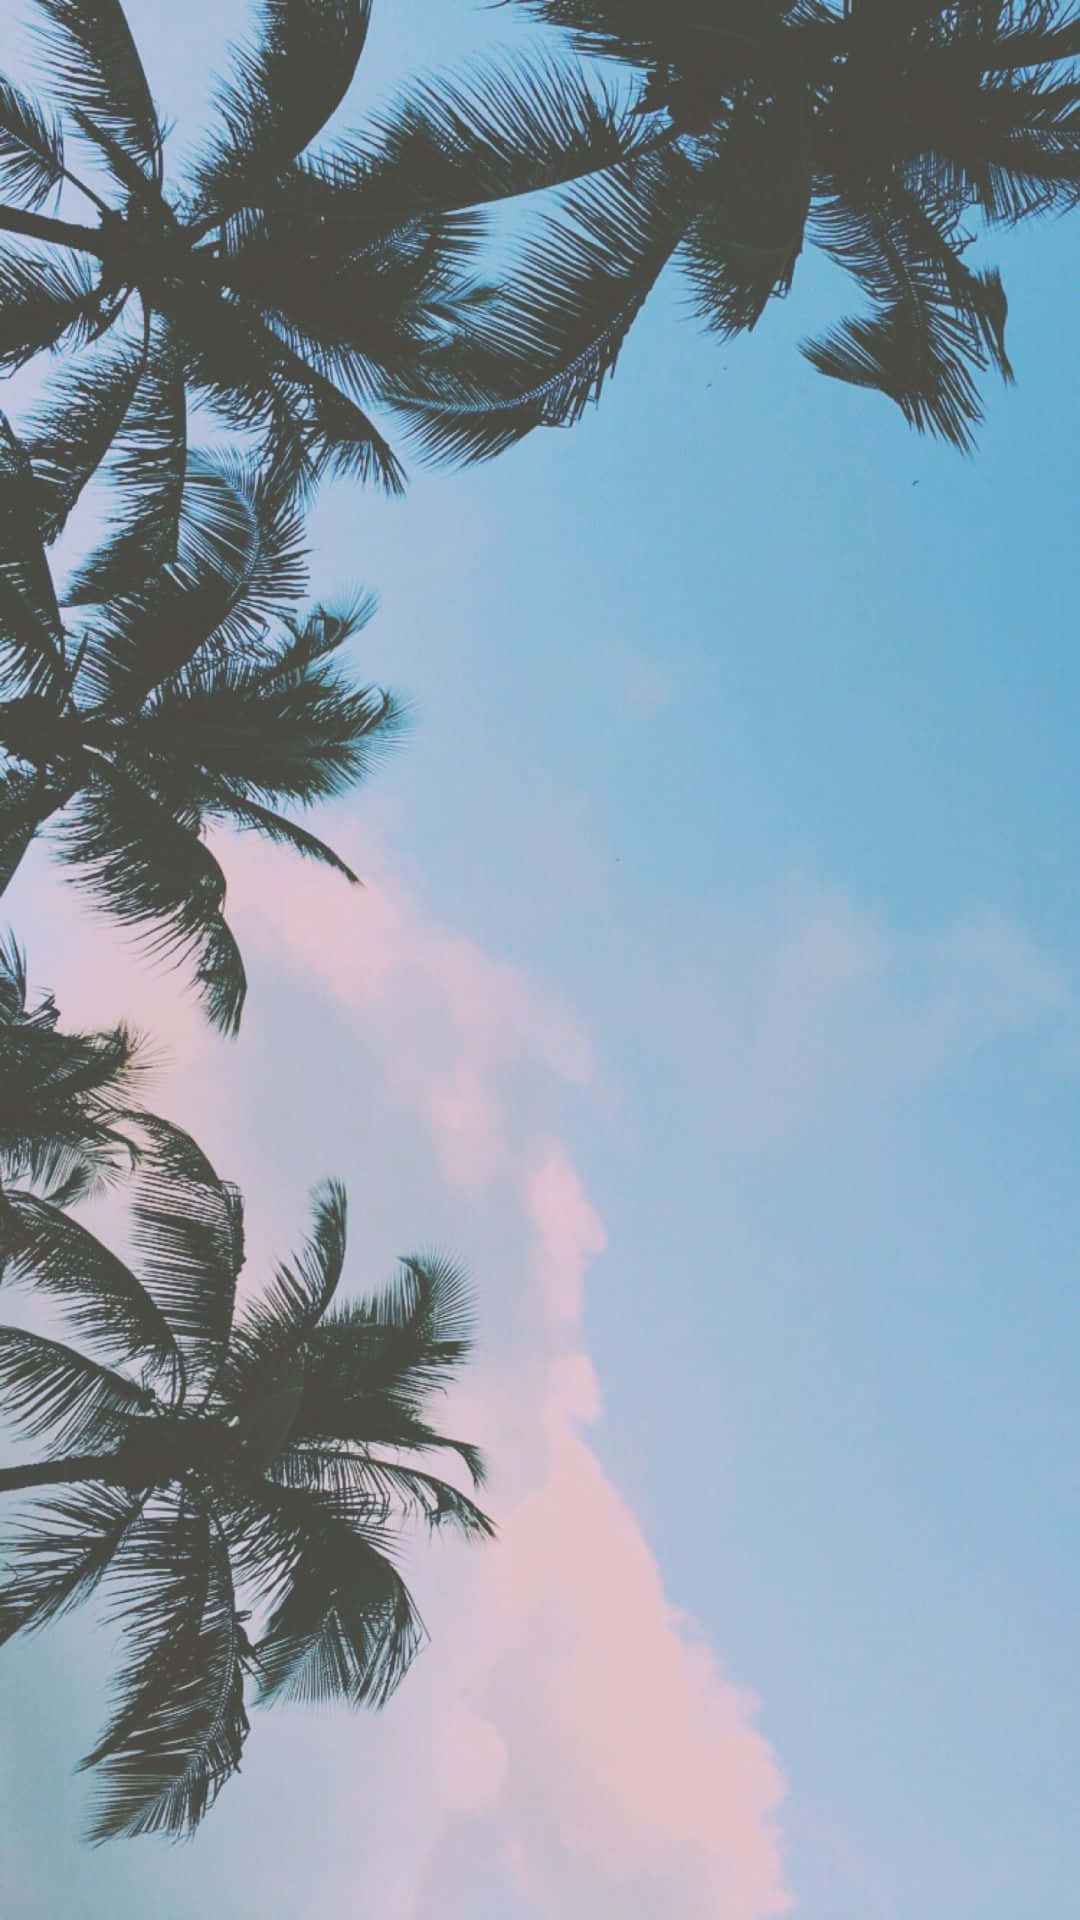 200+] Aesthetic Iphone Backgrounds